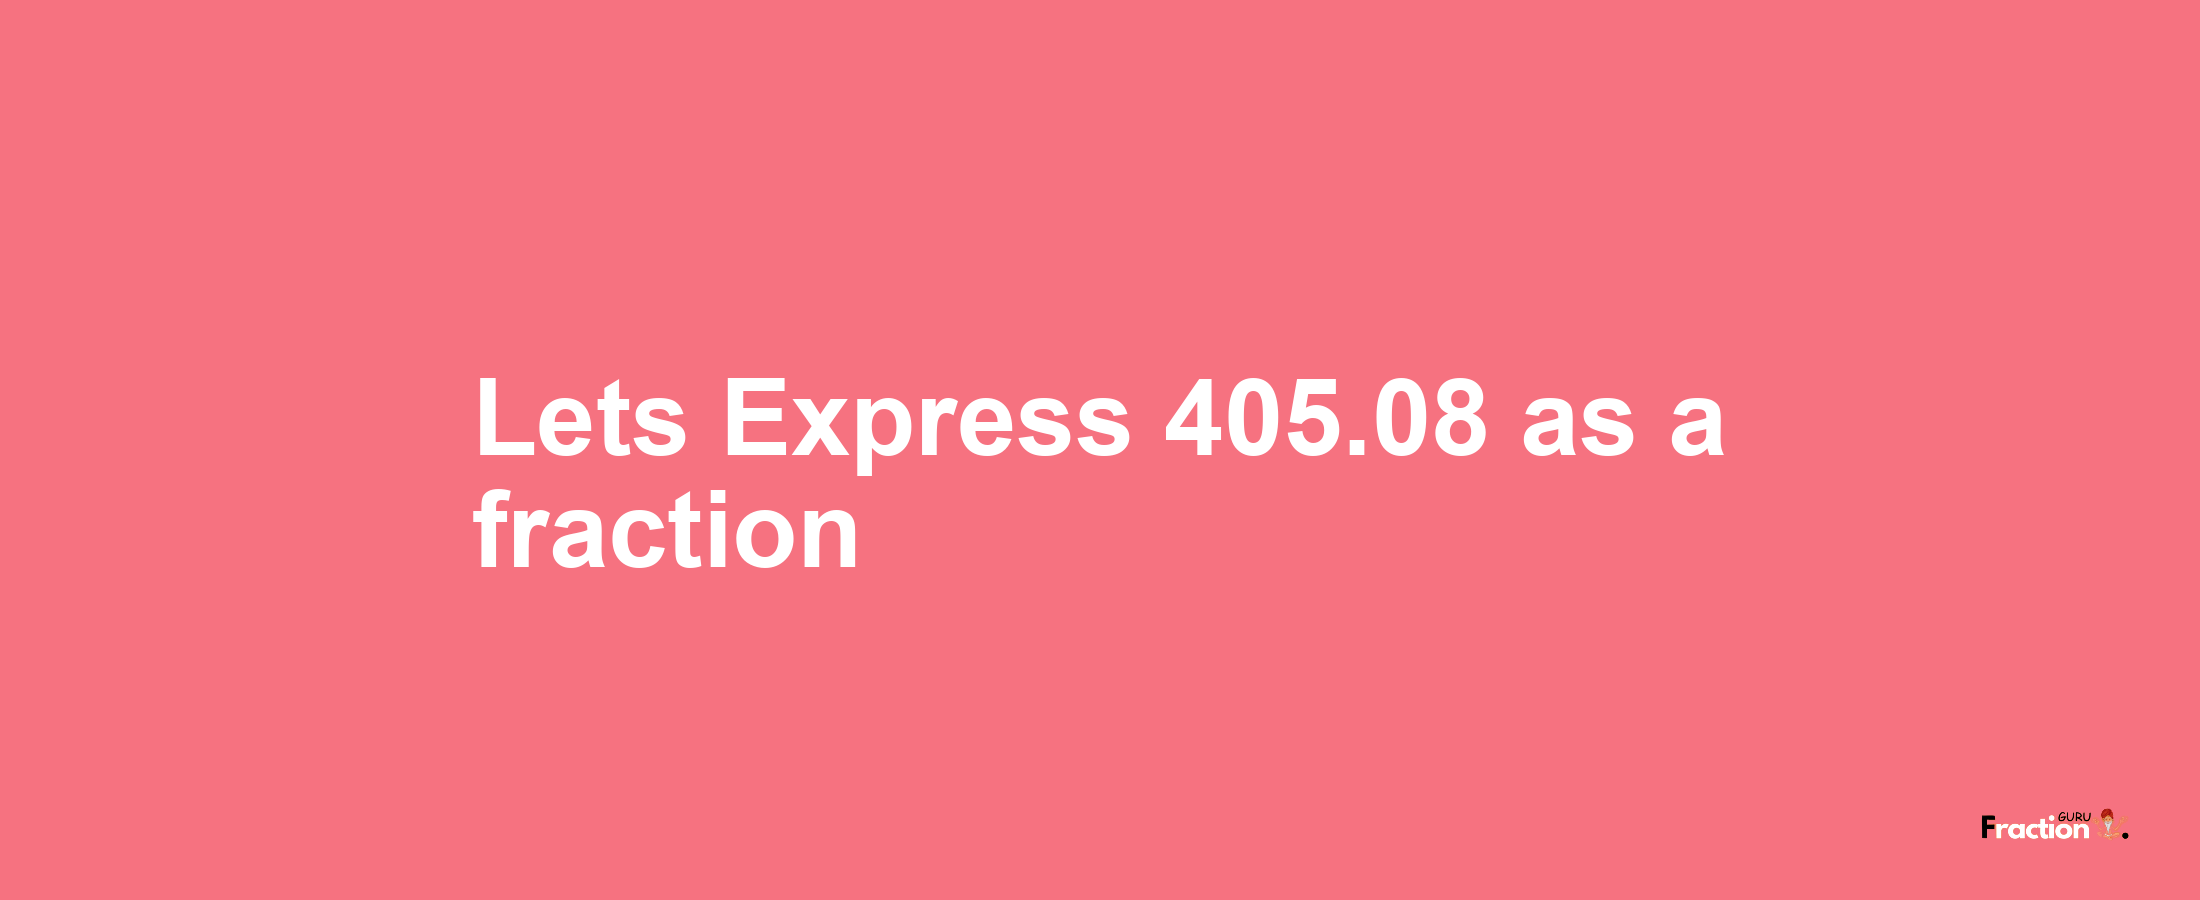 Lets Express 405.08 as afraction